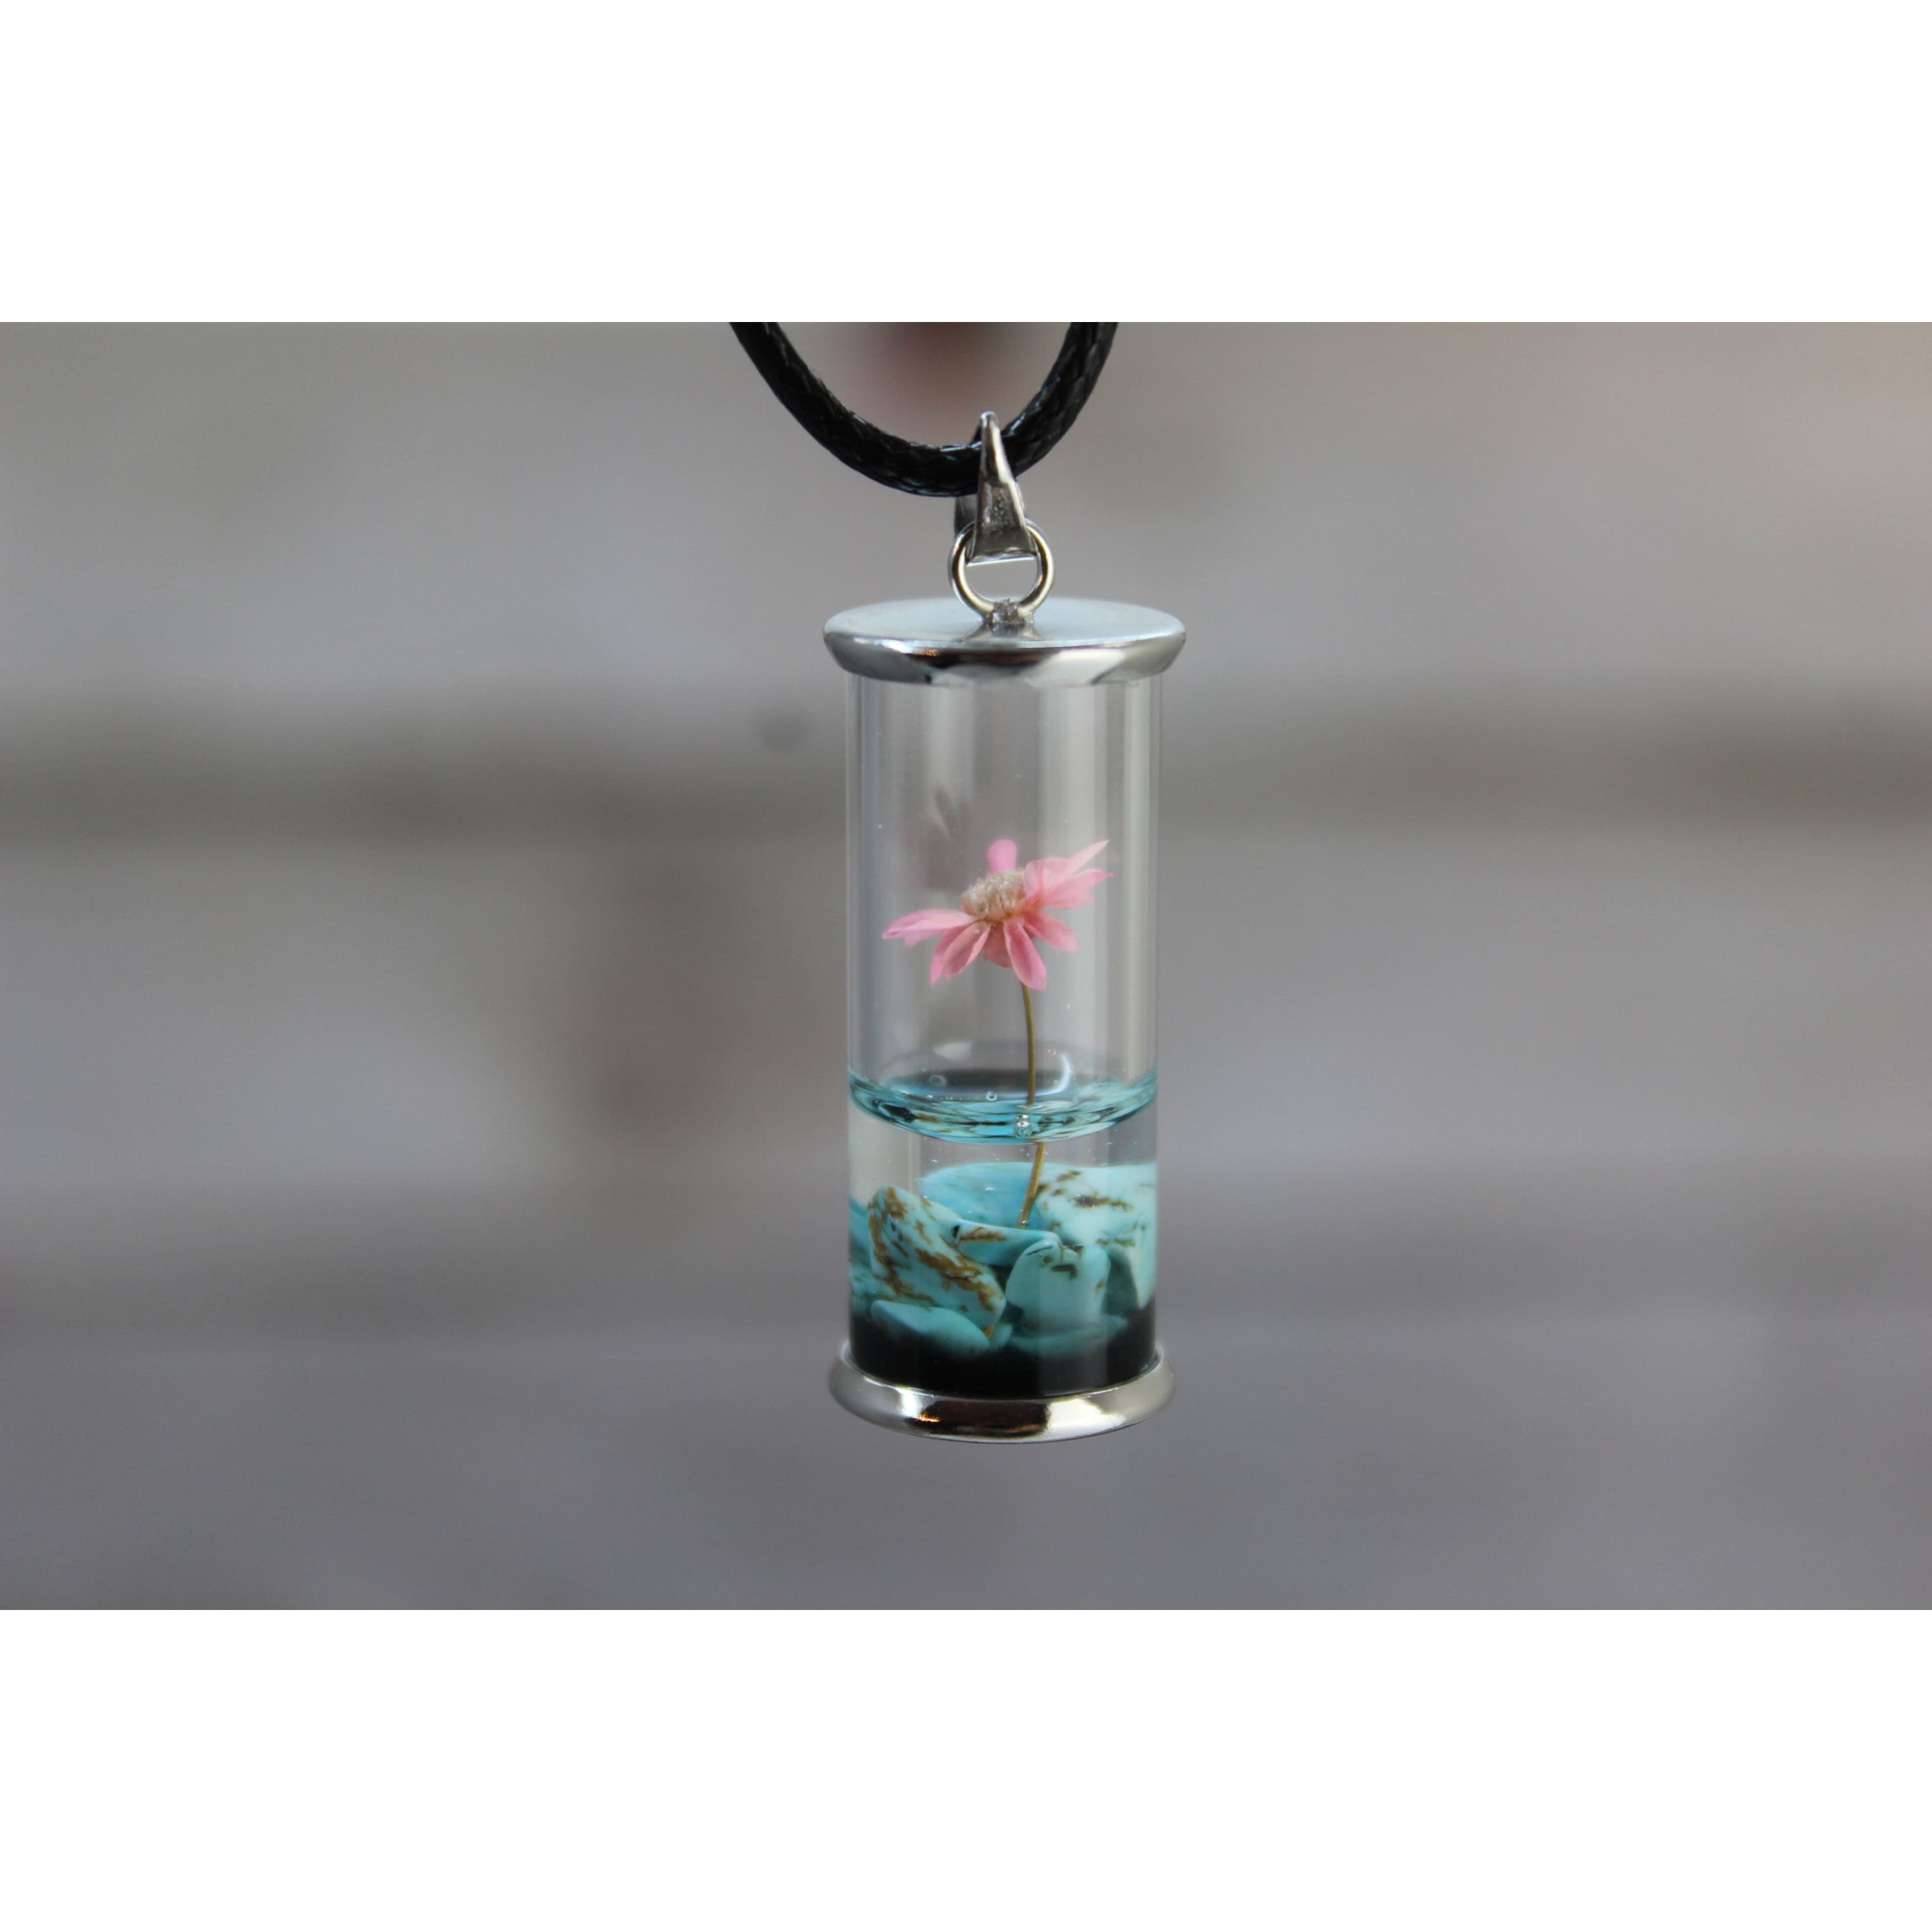 https://cdn.shopify.com/s/files/1/0629/7246/1311/products/liquid-water-jewellery-blue-wish-necklace-in-glass-jewelry-bottle-flower-necklaces-279.jpg